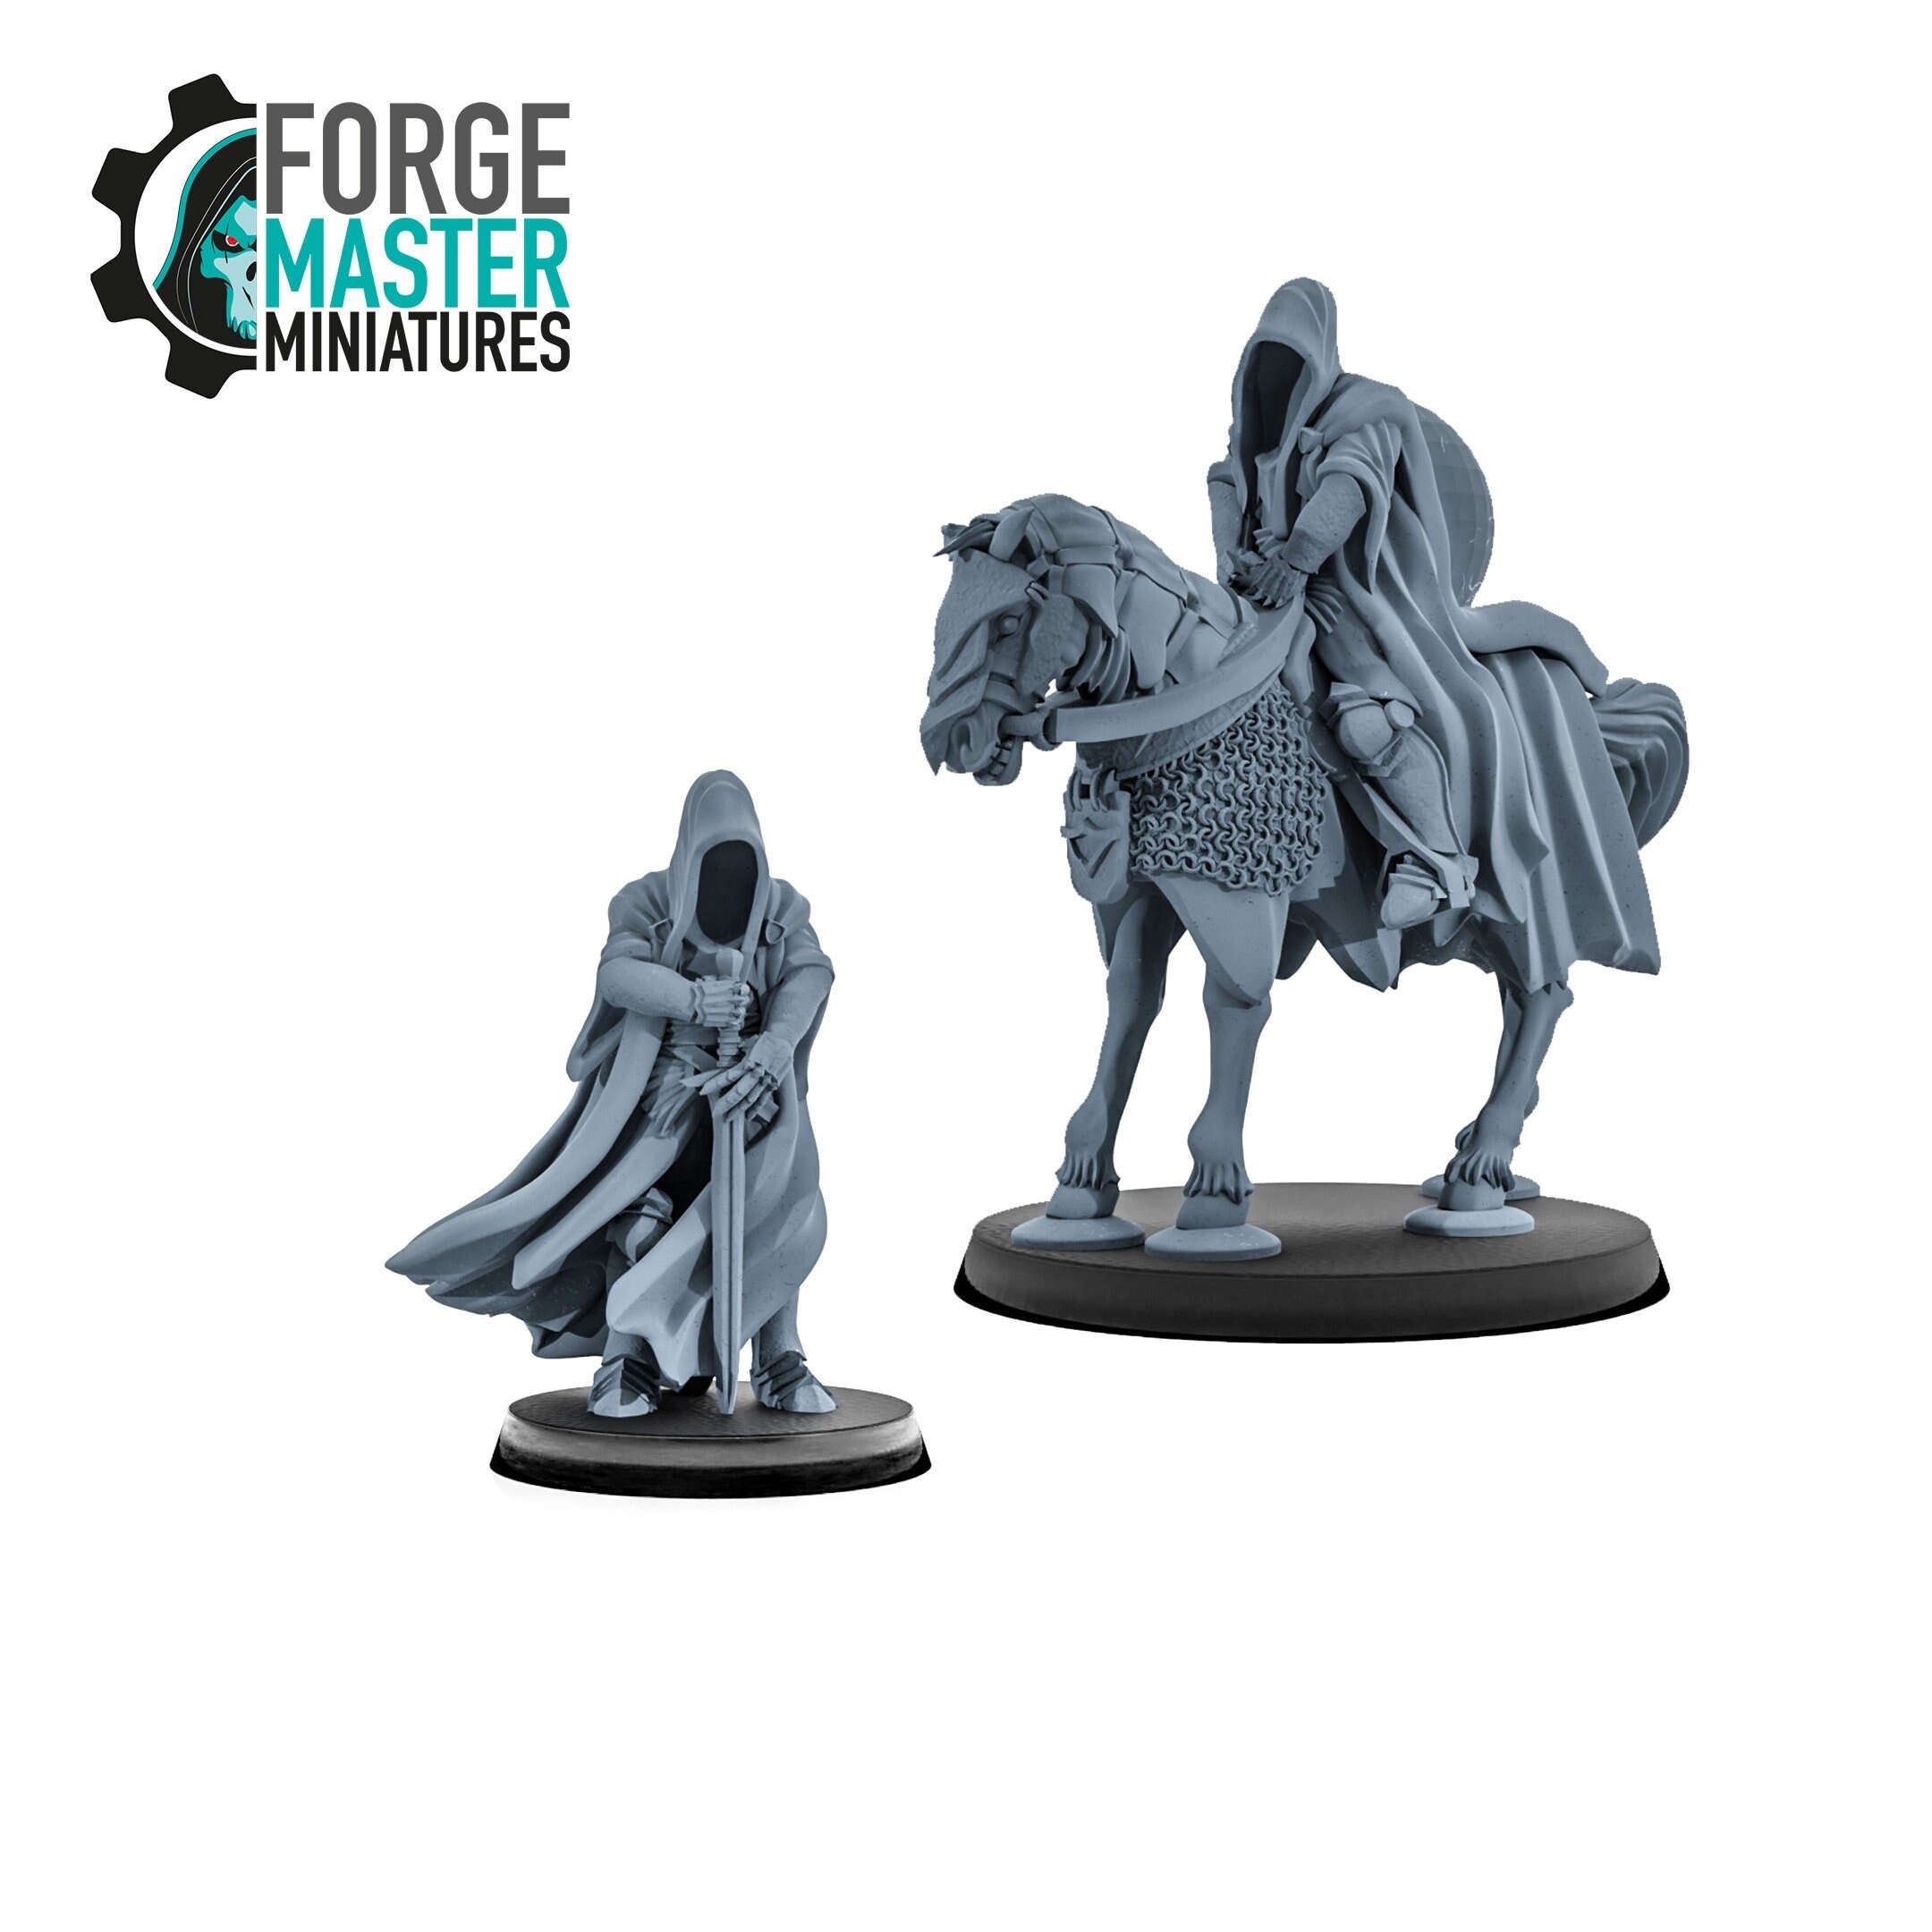 Hollow Lord Wraith wargaming minaiture by Kzk Minis 3D Printed by Forgemaster Miniatures